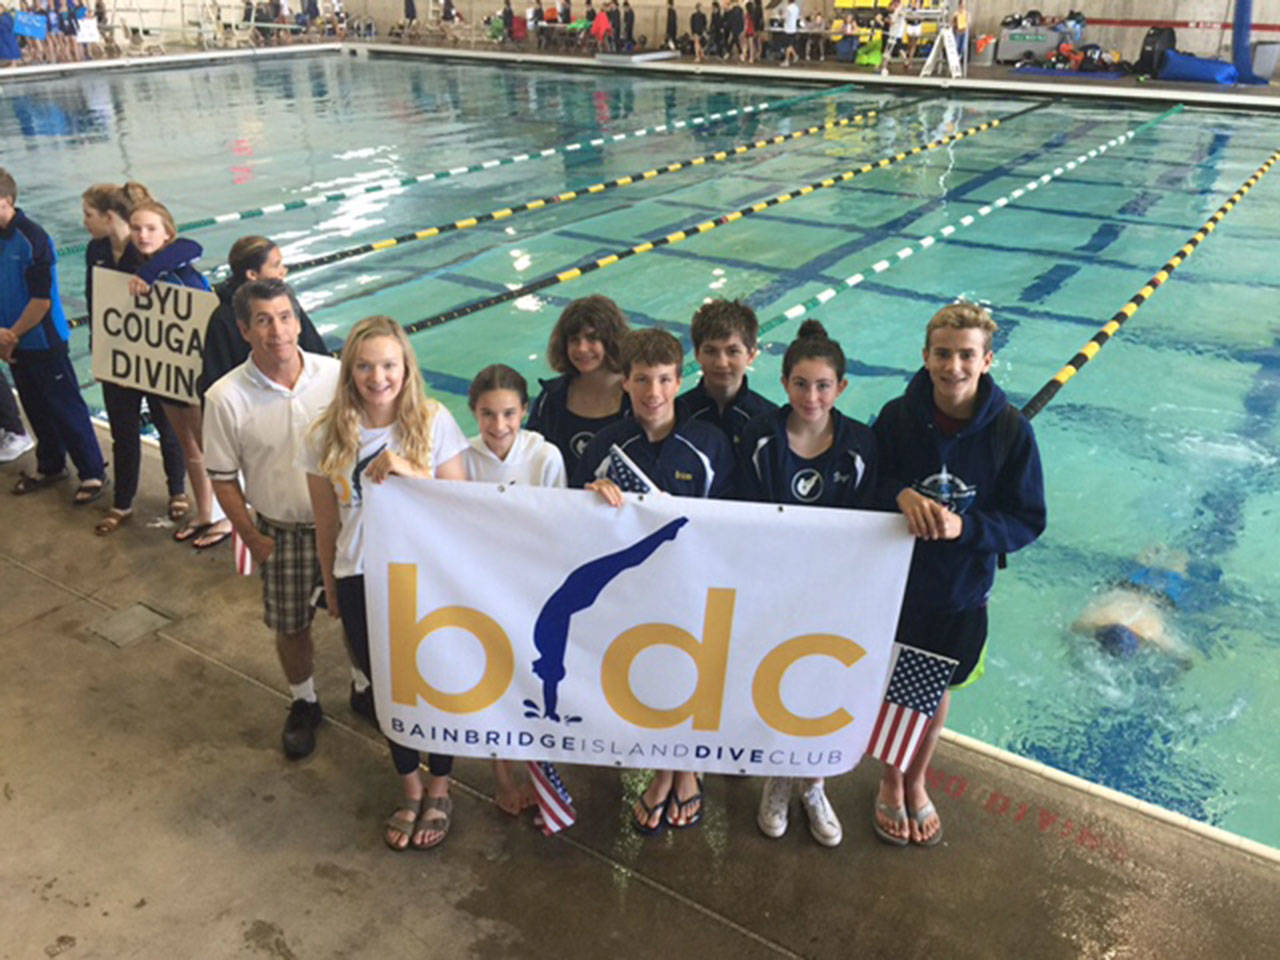 Photo courtesy of the Bainbridge Island Dive Club                                Members of the Bainbridge Island Dive Club gather for a group photo at the USA Diving National Preliminary Zone E Championships in Beaverton, Oregon.